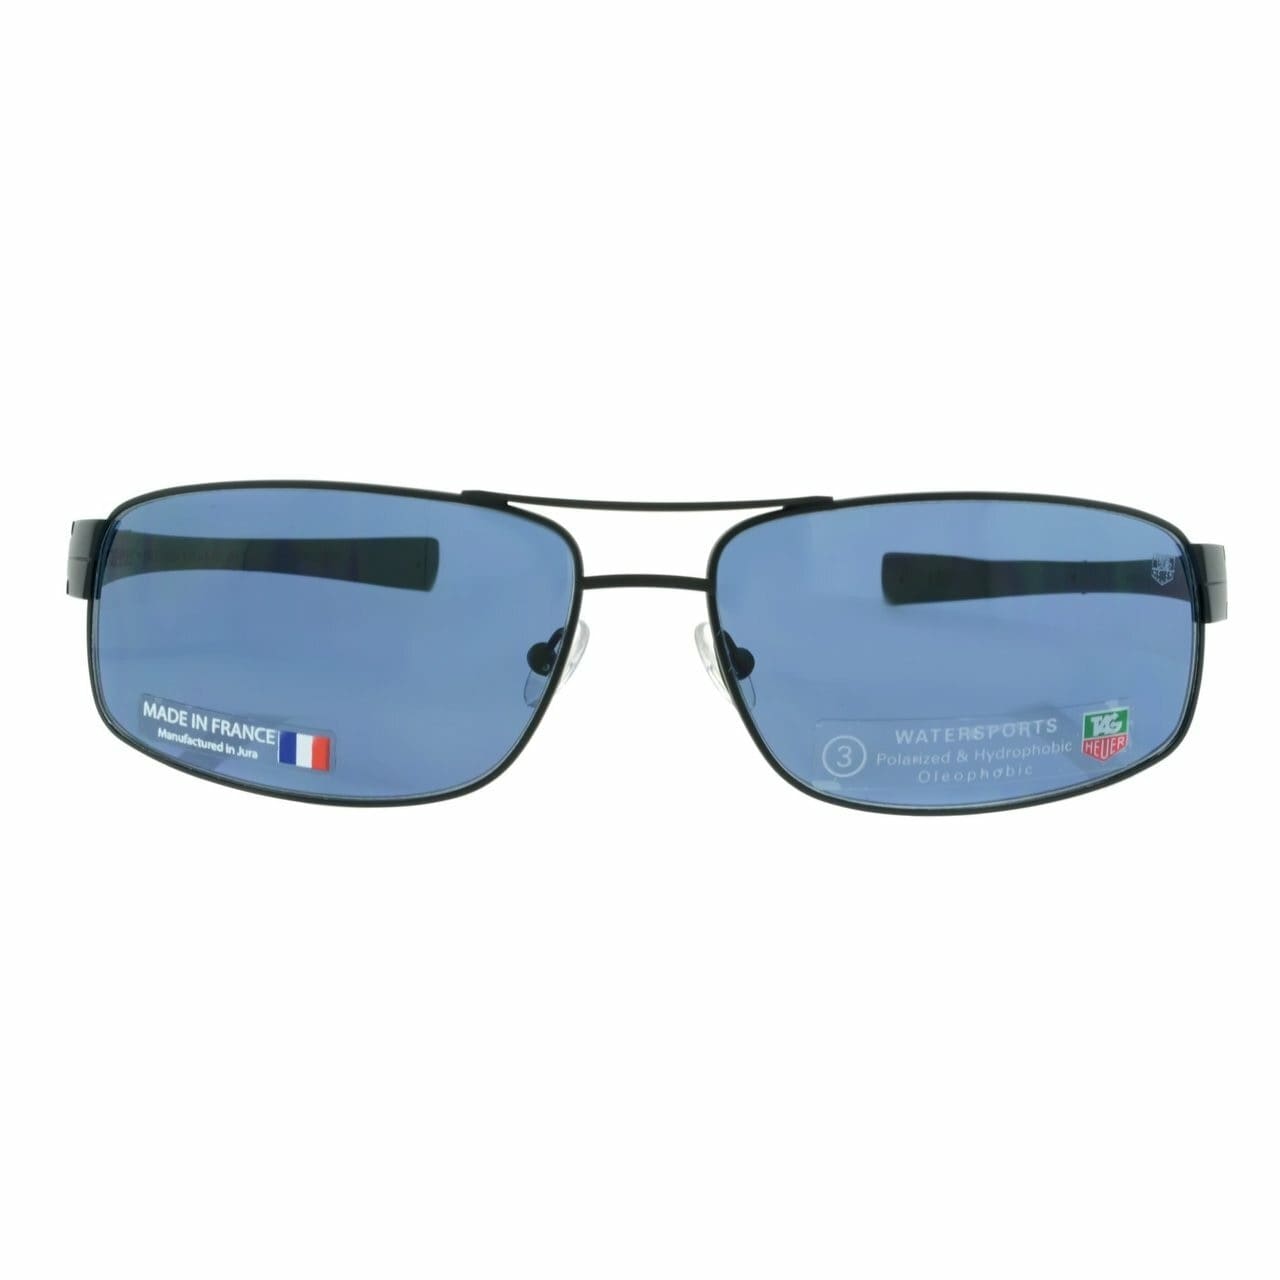 TAG Heuer 0255 404 LRS Watersport Hydrophobic Matte Blue Frame With Polarized Blue Lens Sunglasses 660255404641603